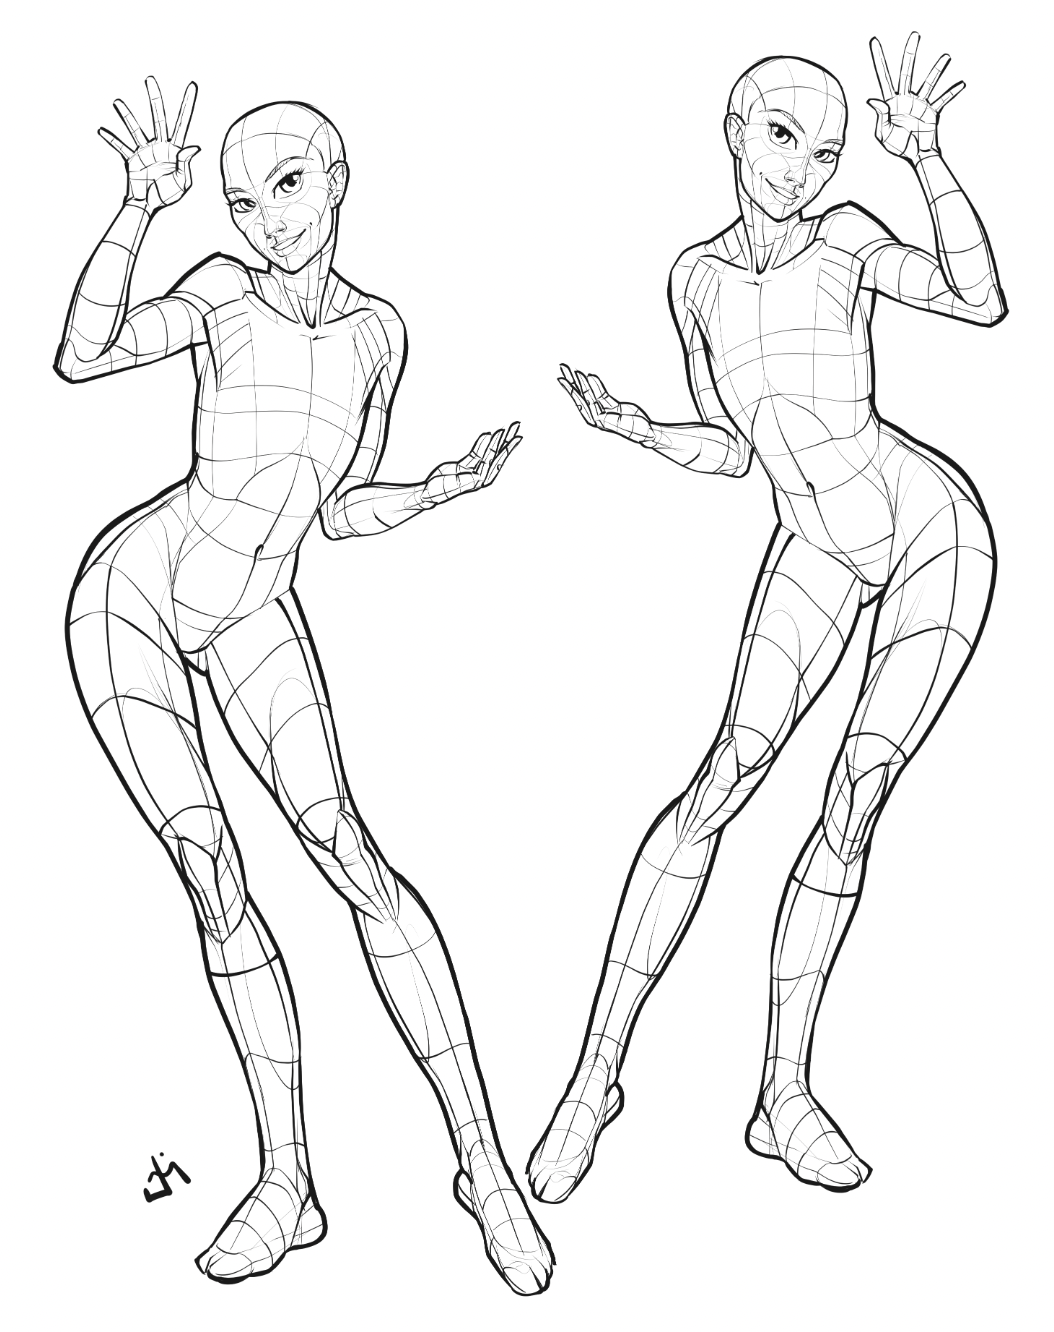 I've been working on some poses for my... - Poses for Artists | Facebook